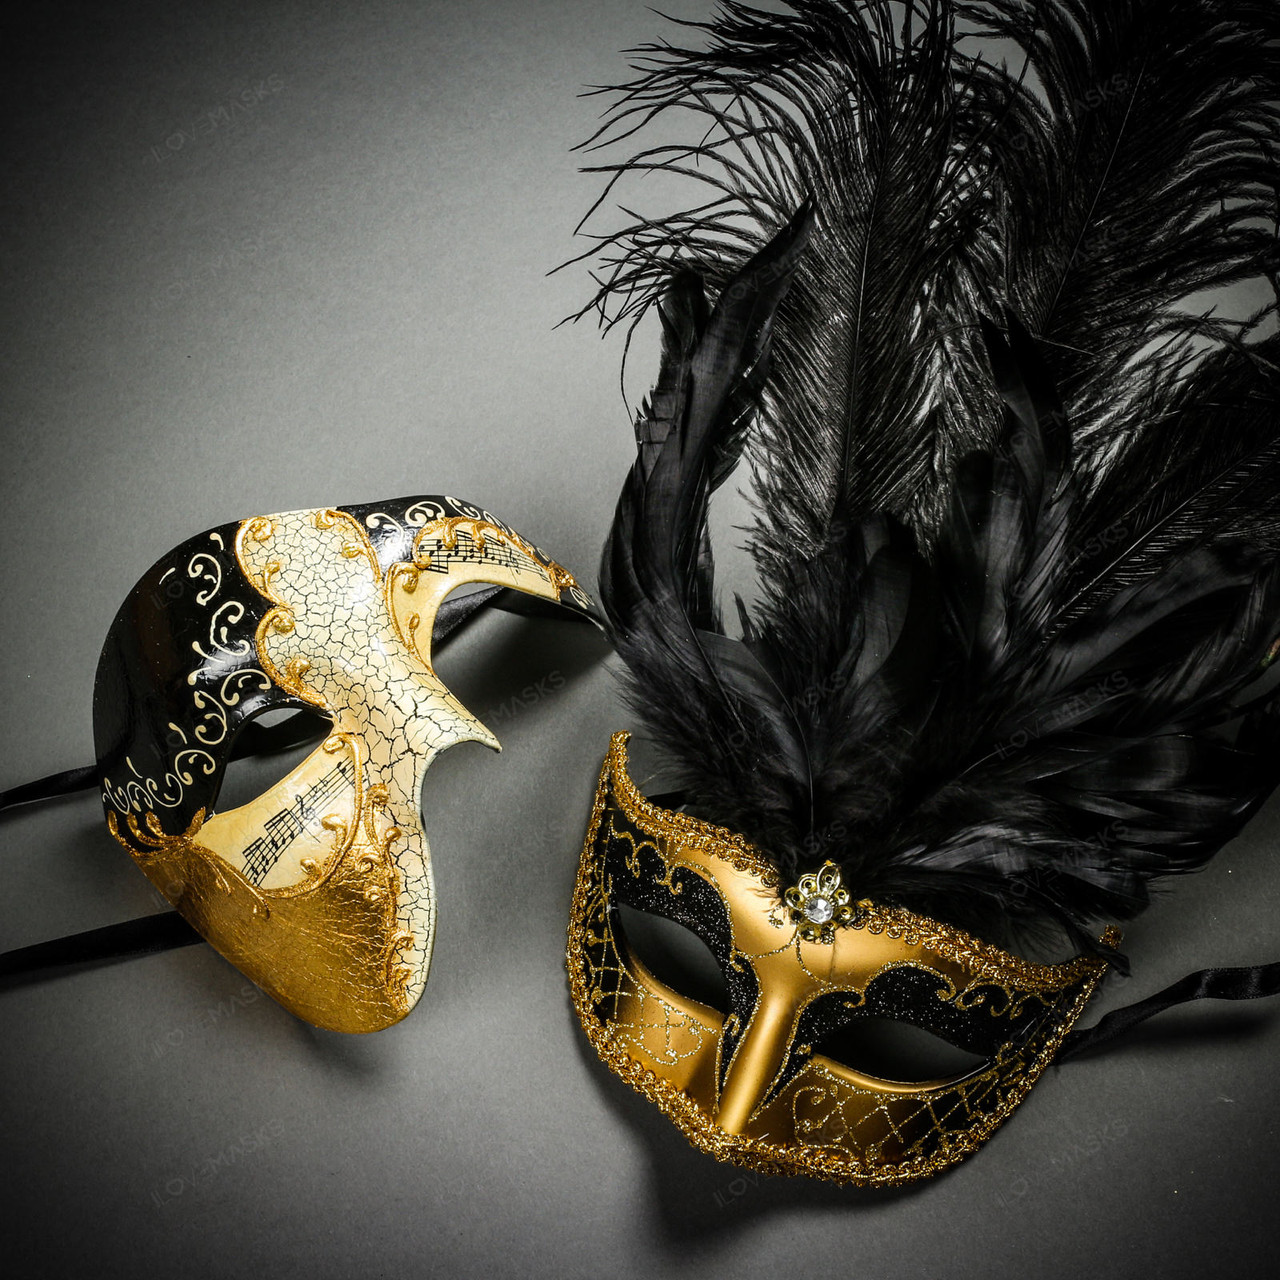 Black and Gold Mardi Gras Mask with Feather - Each